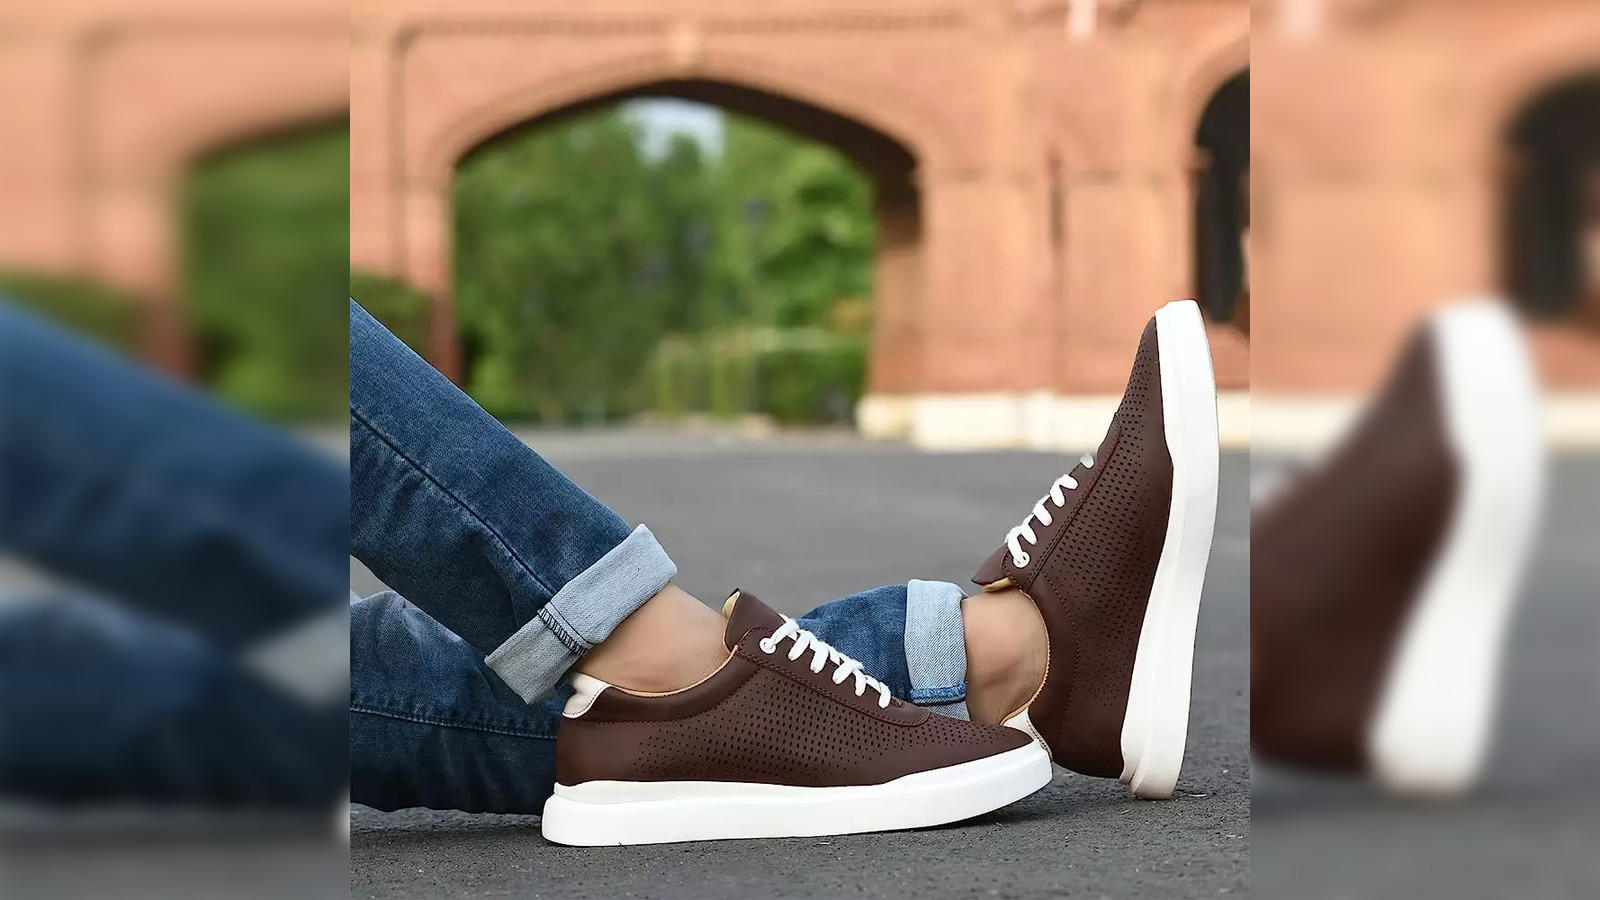 Sneakers for men: Stylish sneakers for men to elevate your look